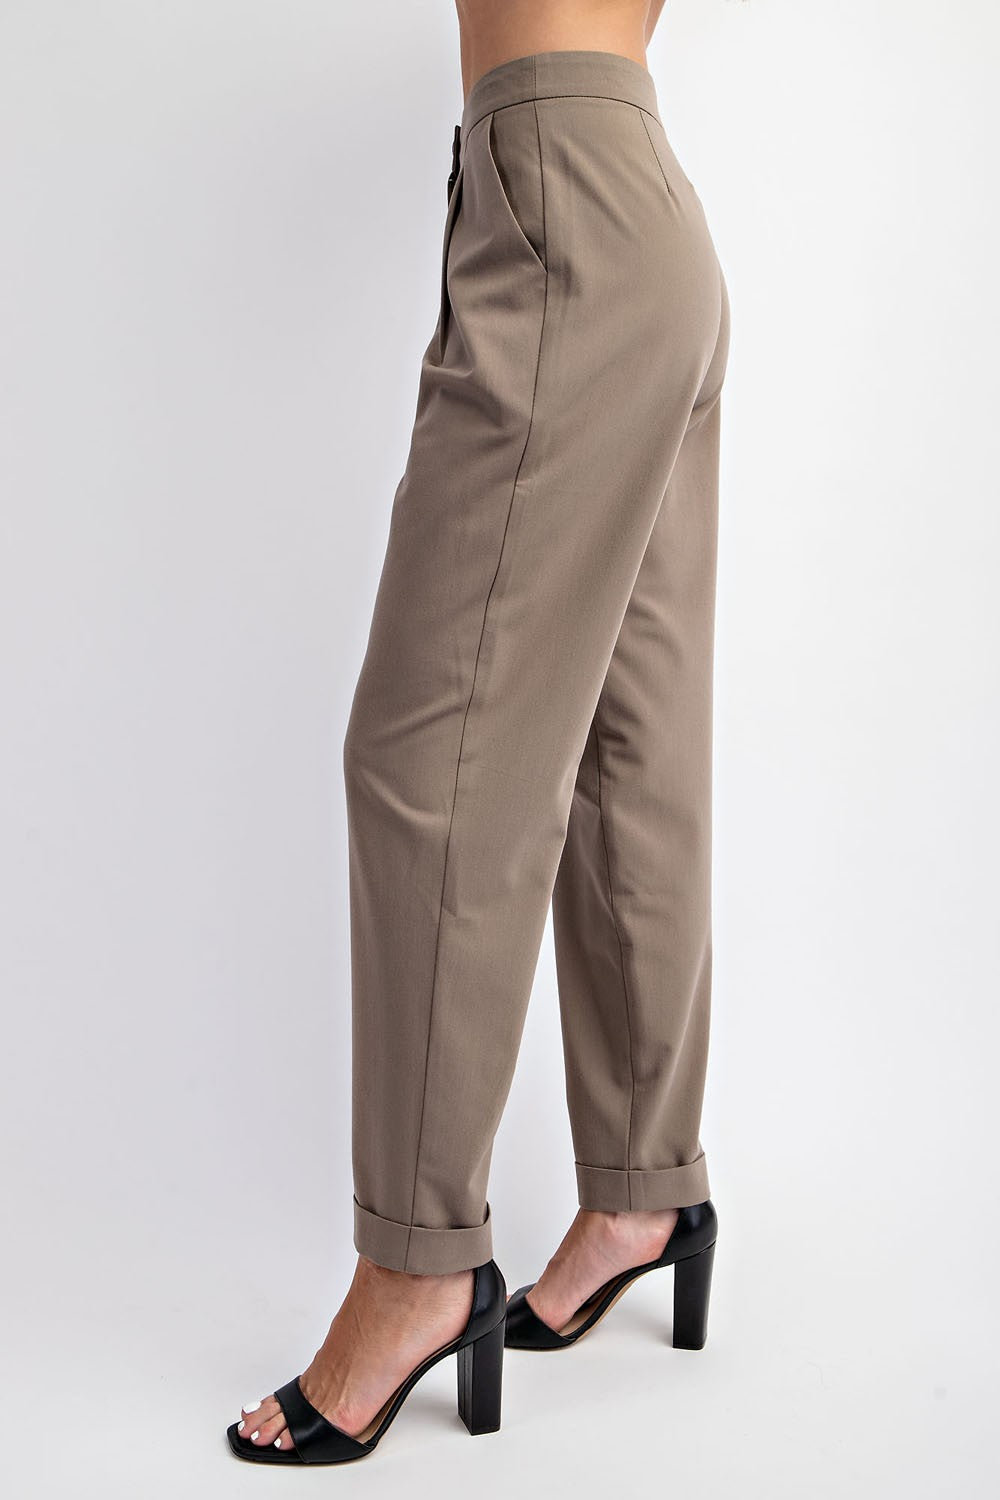 Polly Pleated Trouser- Olive